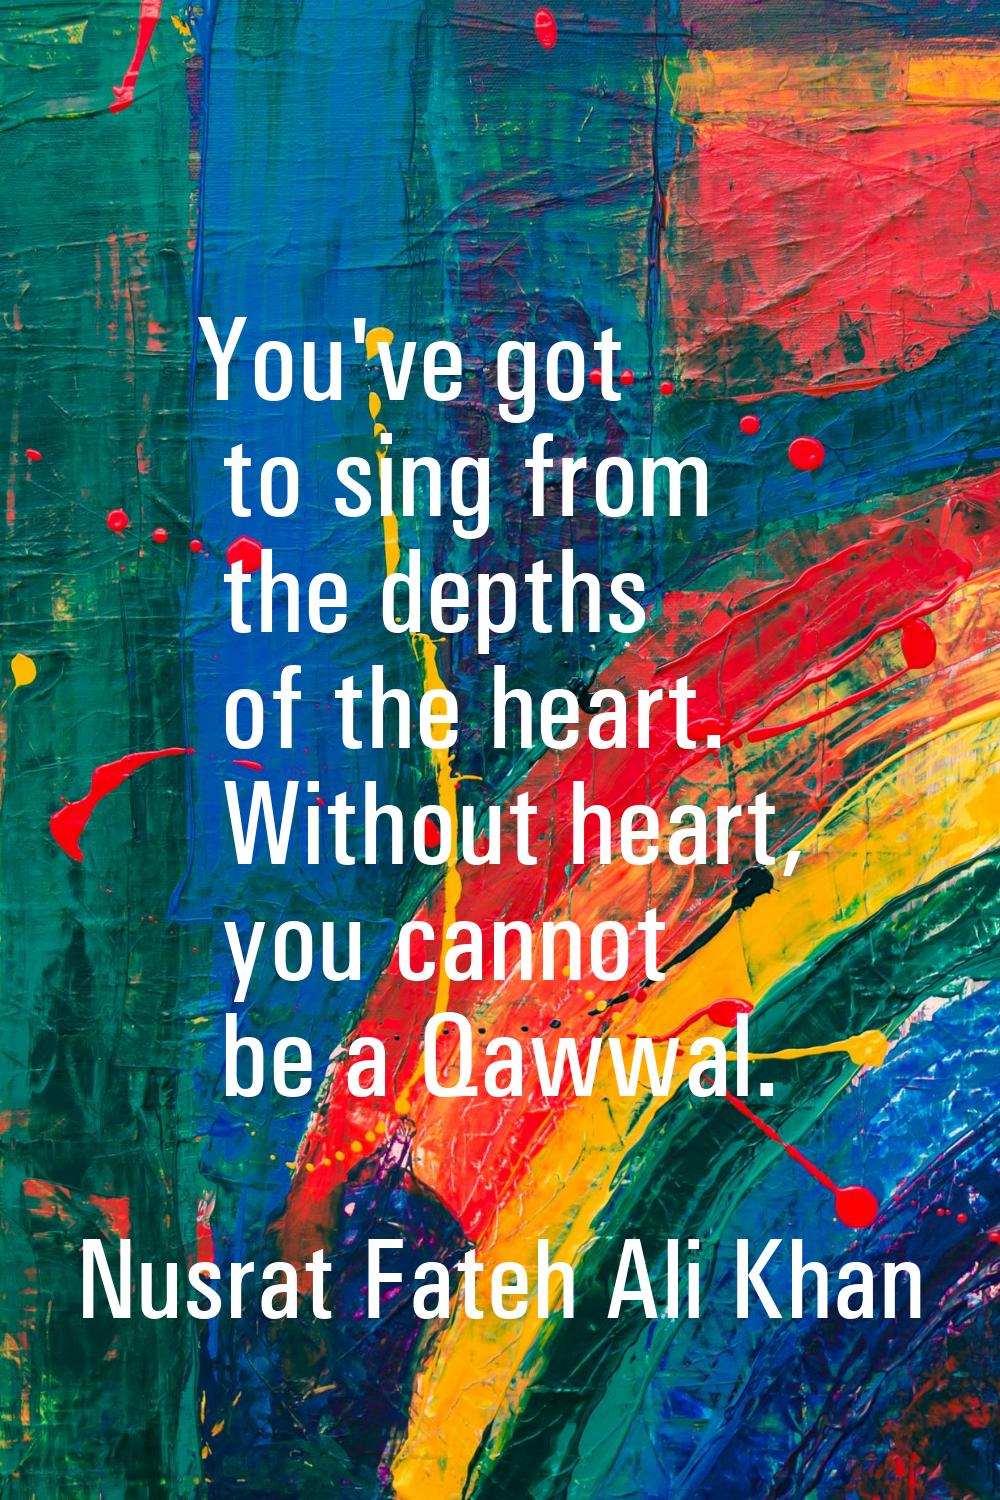 You've got to sing from the depths of the heart. Without heart, you cannot be a Qawwal.